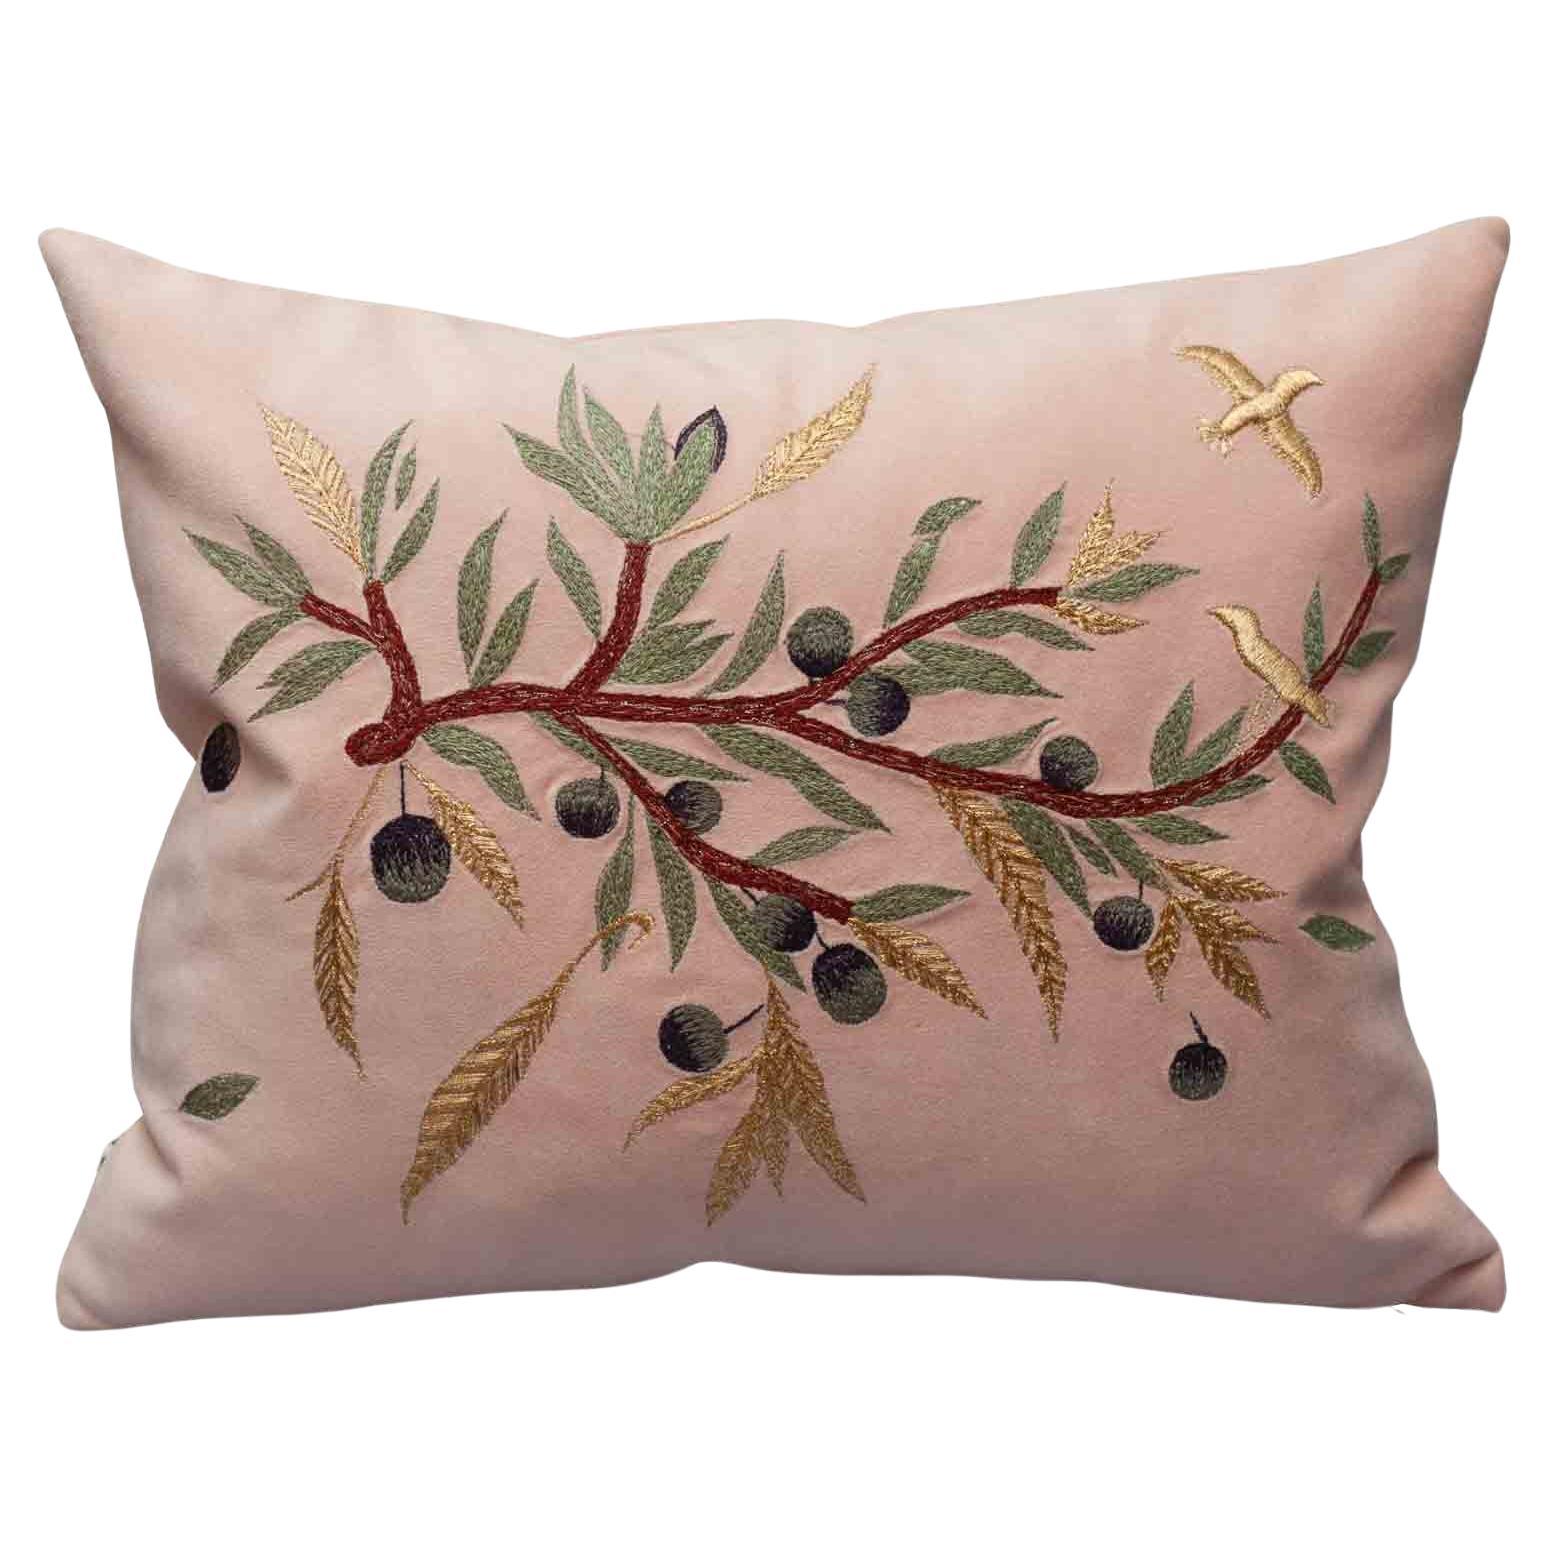 Contemporary Embroidered Pillow on Soft Pink Ultrasuede with Dove & Olive Branch For Sale